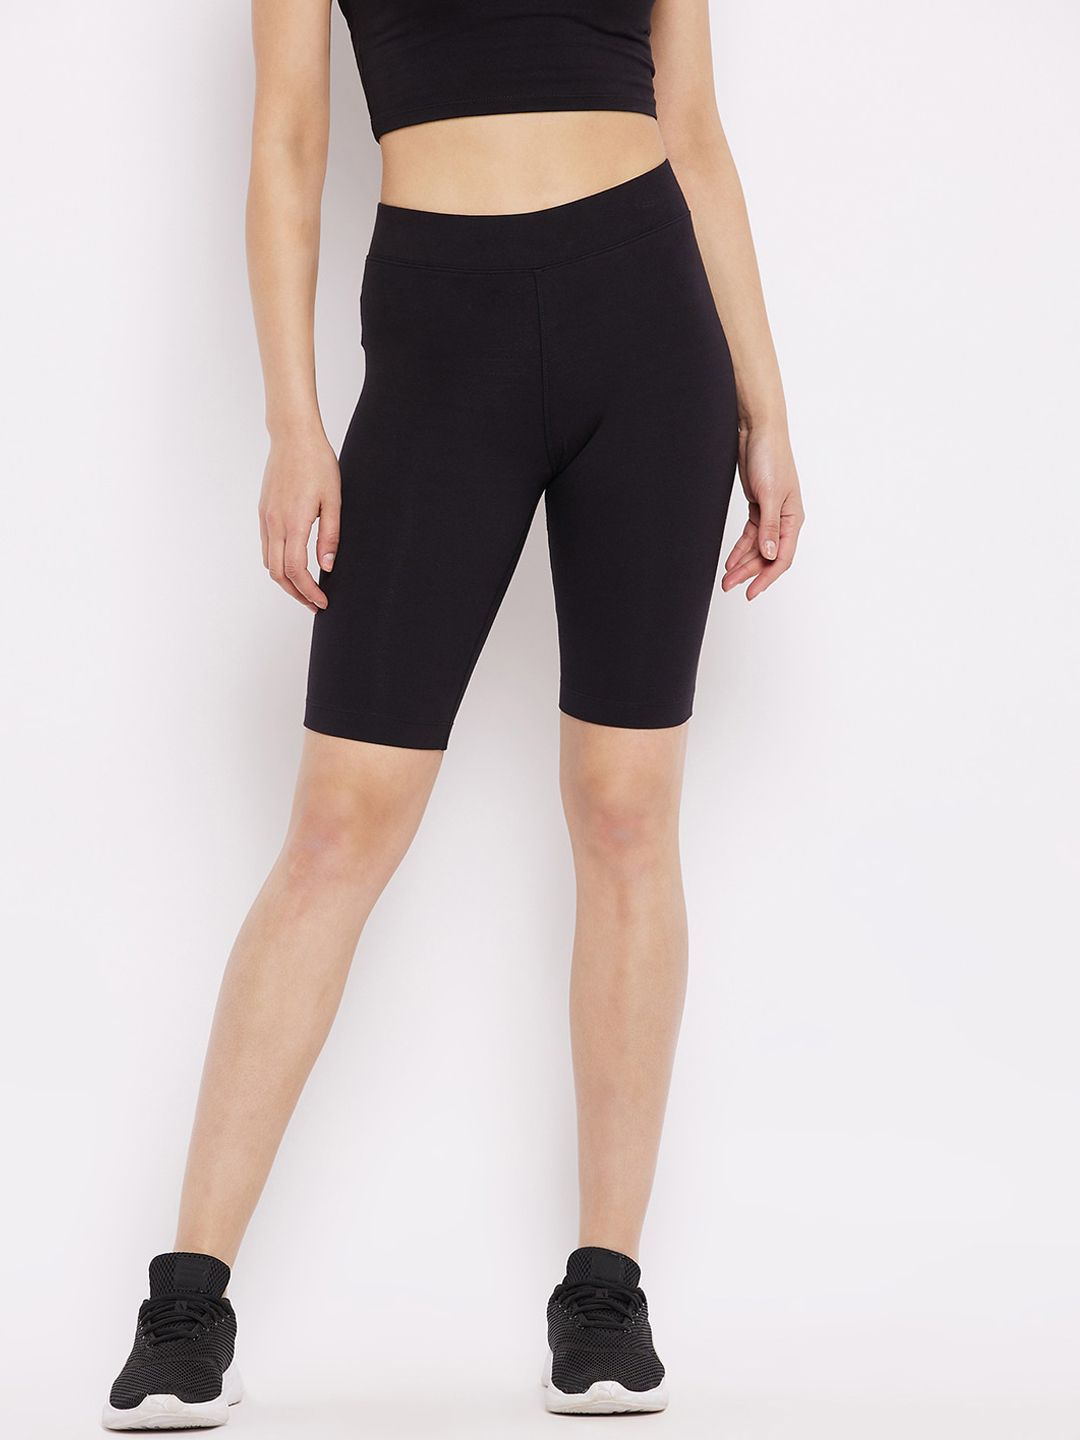 Hypernation Women Black Skinny Fit Cycling Sports Shorts Price in India